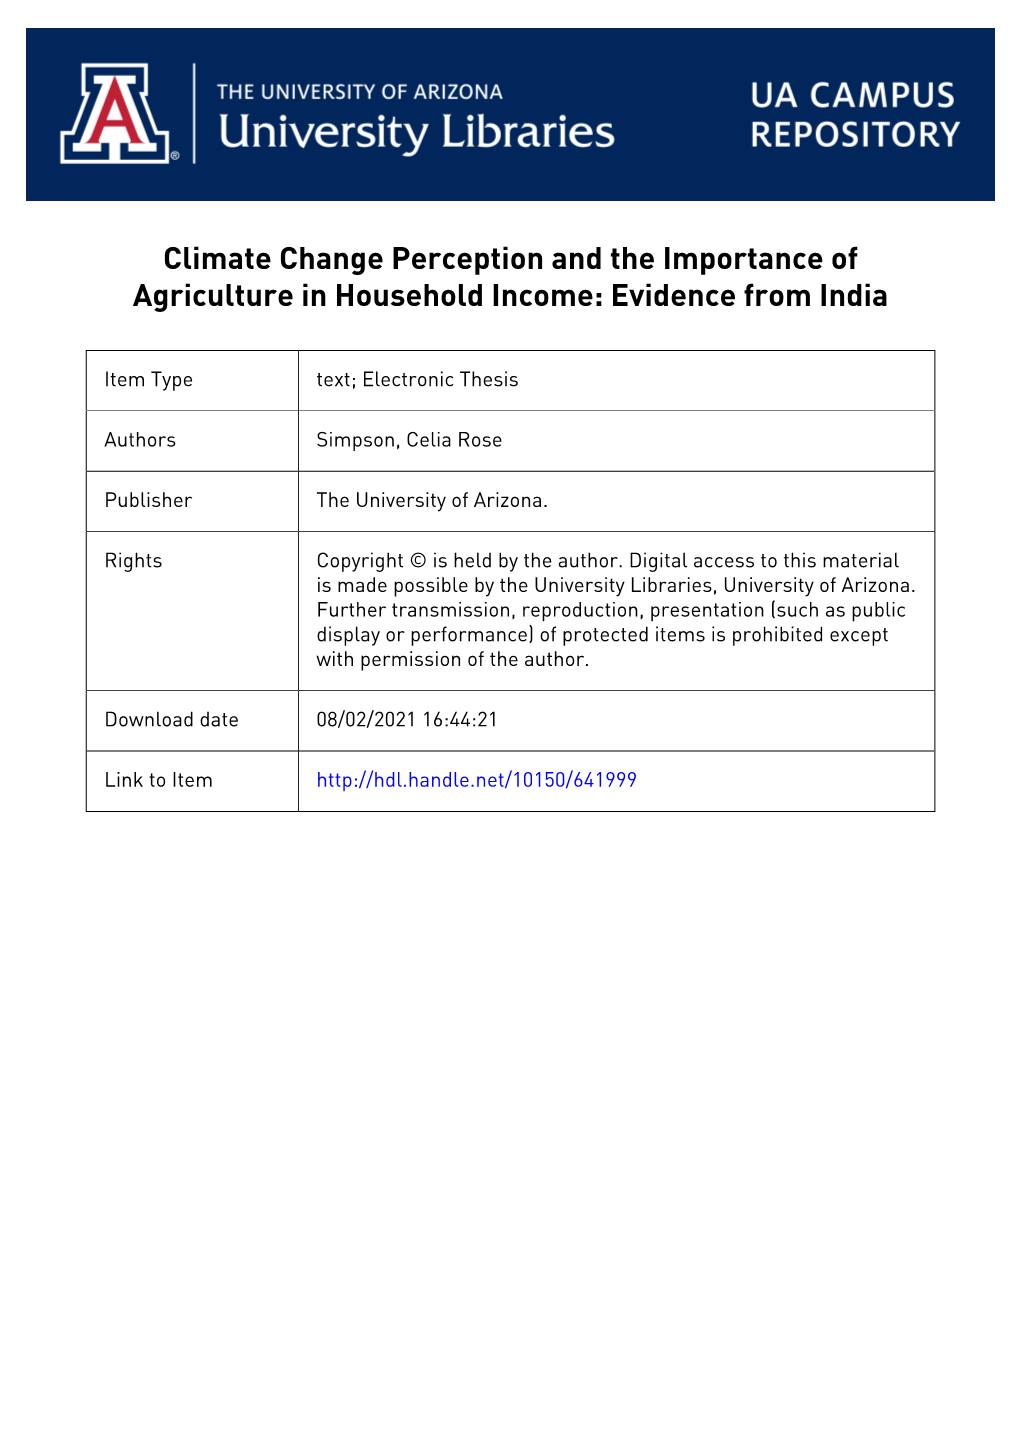 Climate Change Perception and the Importance of Agriculture in Household Income: Evidence from India